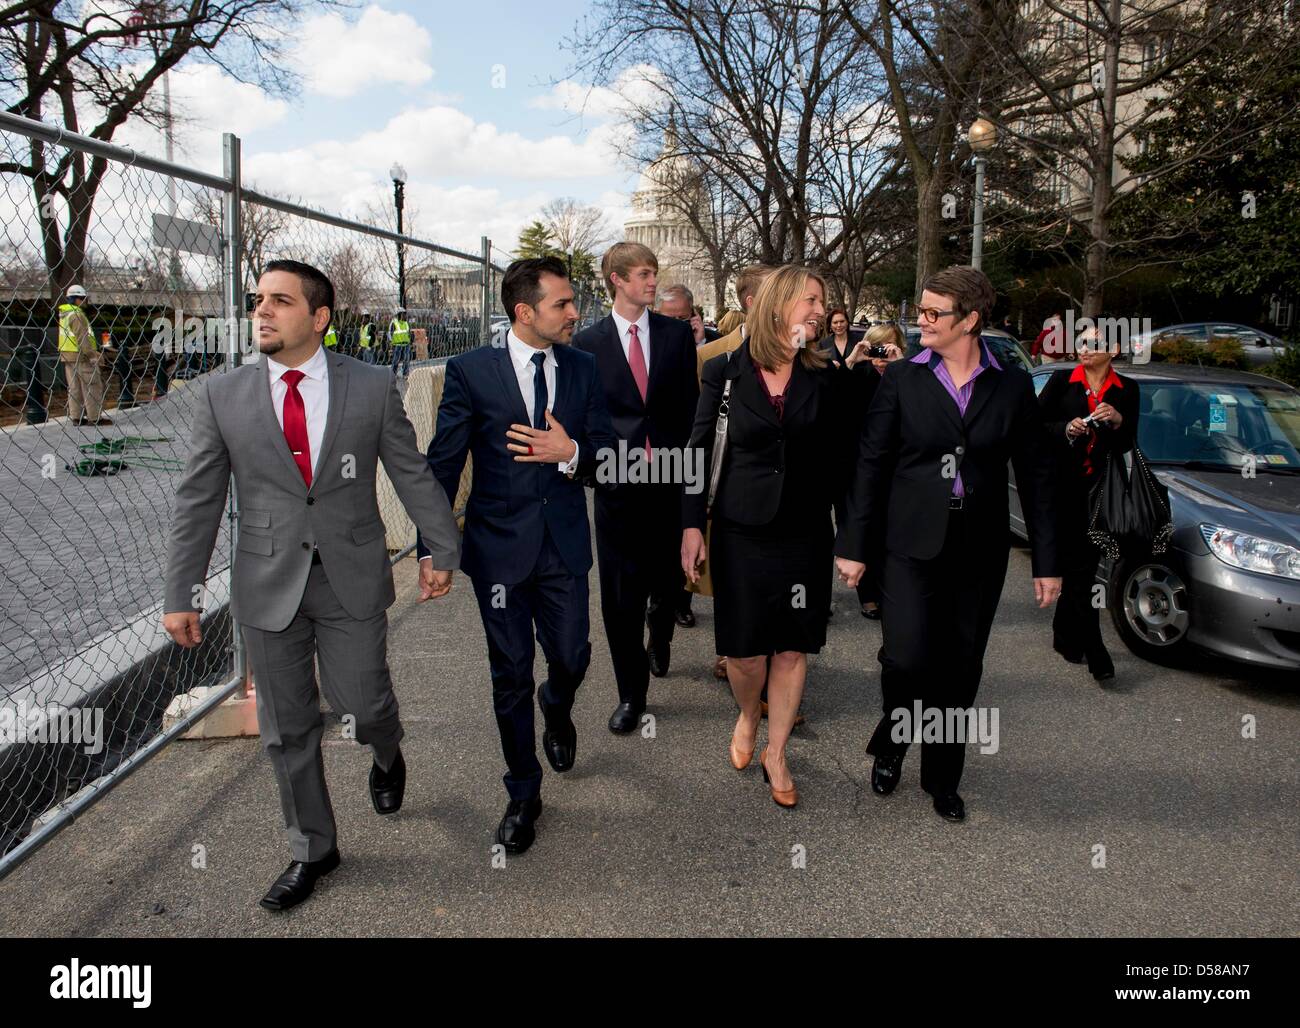 March 26, 2013 - Washington, District of Columbia, U.S. - Prop 8 plaintiffs (from left) JEFF ZARRILLO, PAUL KATAMI, SANDY STIER and KRIS PERRY leave the U.S. Supreme Court after oral arguments in the landmark Proposition 8 marriage equality case.(Credit Image: © Brian Cahn/ZUMAPRESS.com) Stock Photo